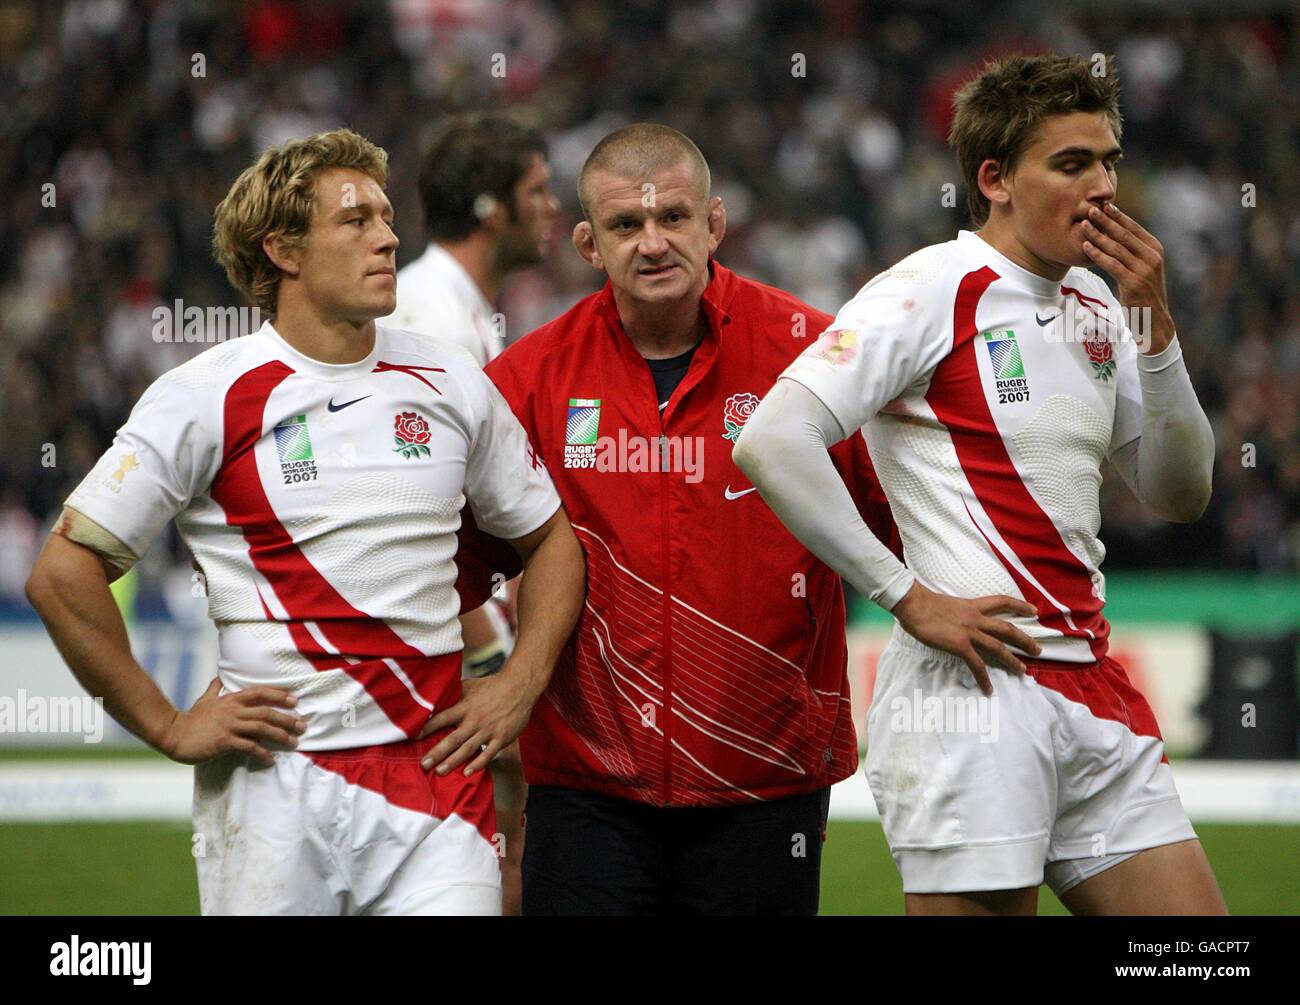 Rugby Union - IRB Rugby World Cup - Final - England v South Africa - Stade de France. England's Jonny Wilkinson, Toby Flood (r) and coach Graham Rowntree (c) stand dejected after the final whistle Stock Photo